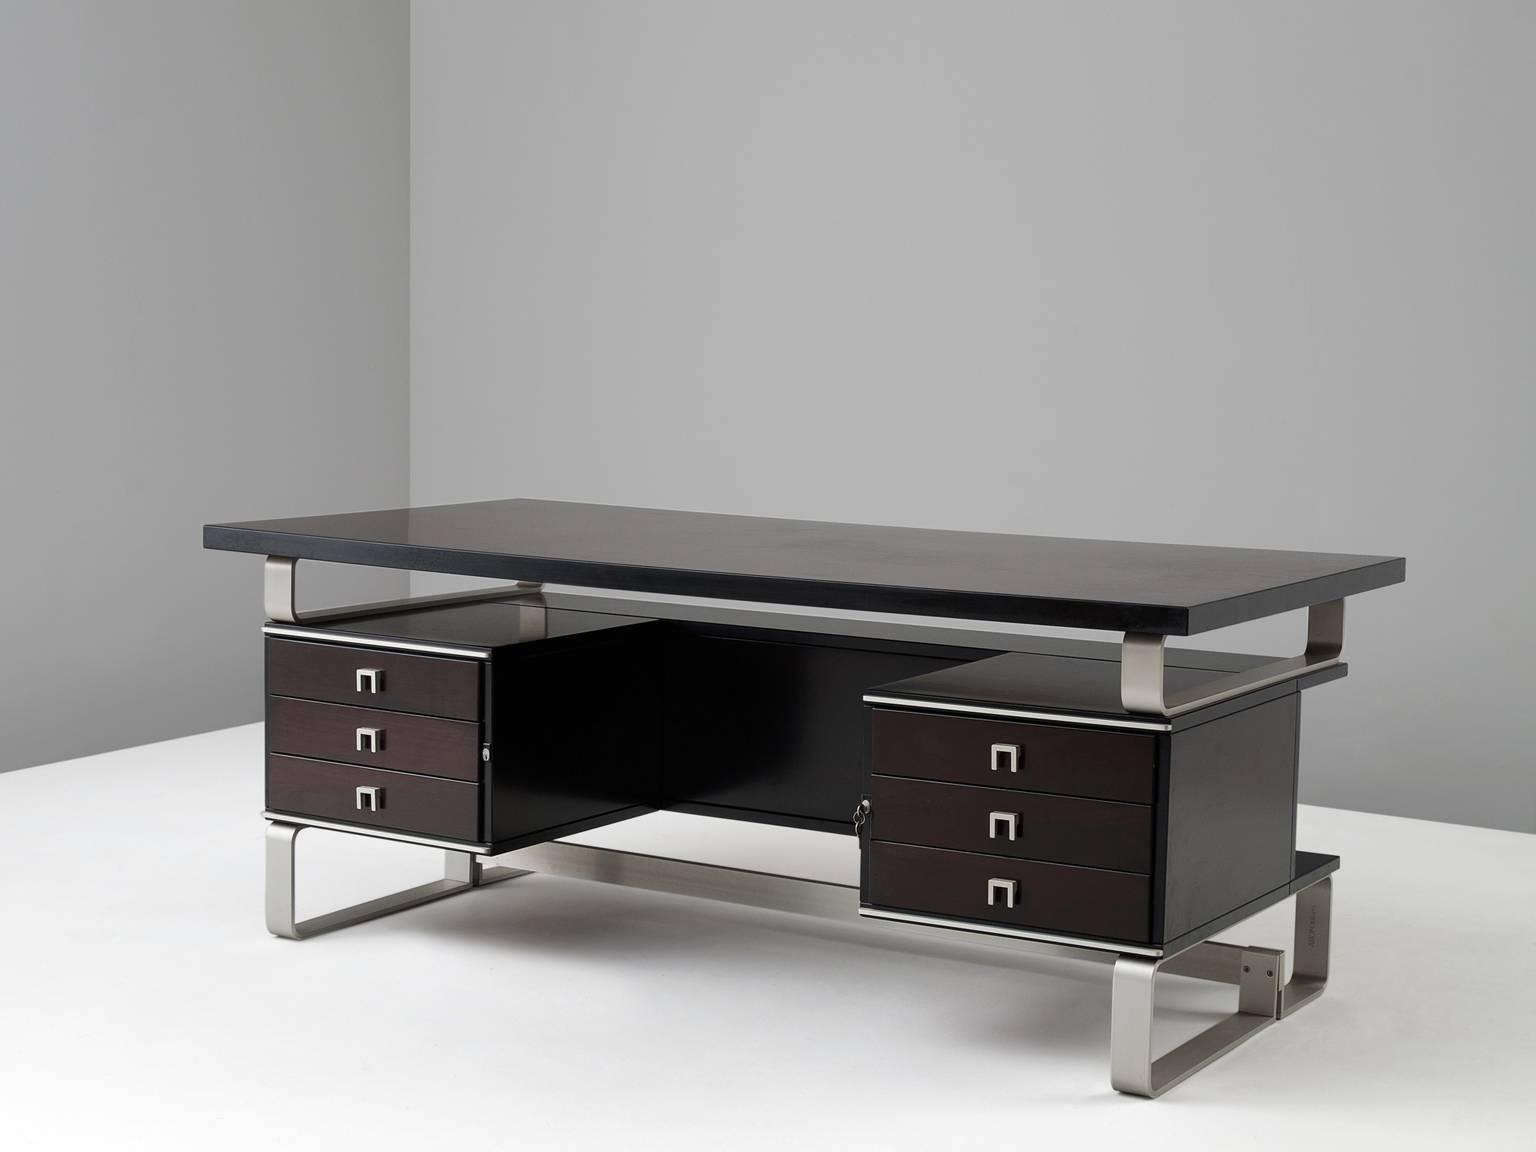 Desk, in mahogany and aluminium, for Abbondinterni,  Italy 1960s.

Italian desk. Frame from aluminium strips. Both sides of the desks are equipped with three drawers. Rectangular table top. The mahogany is stained in a dark brown/ruby color, which